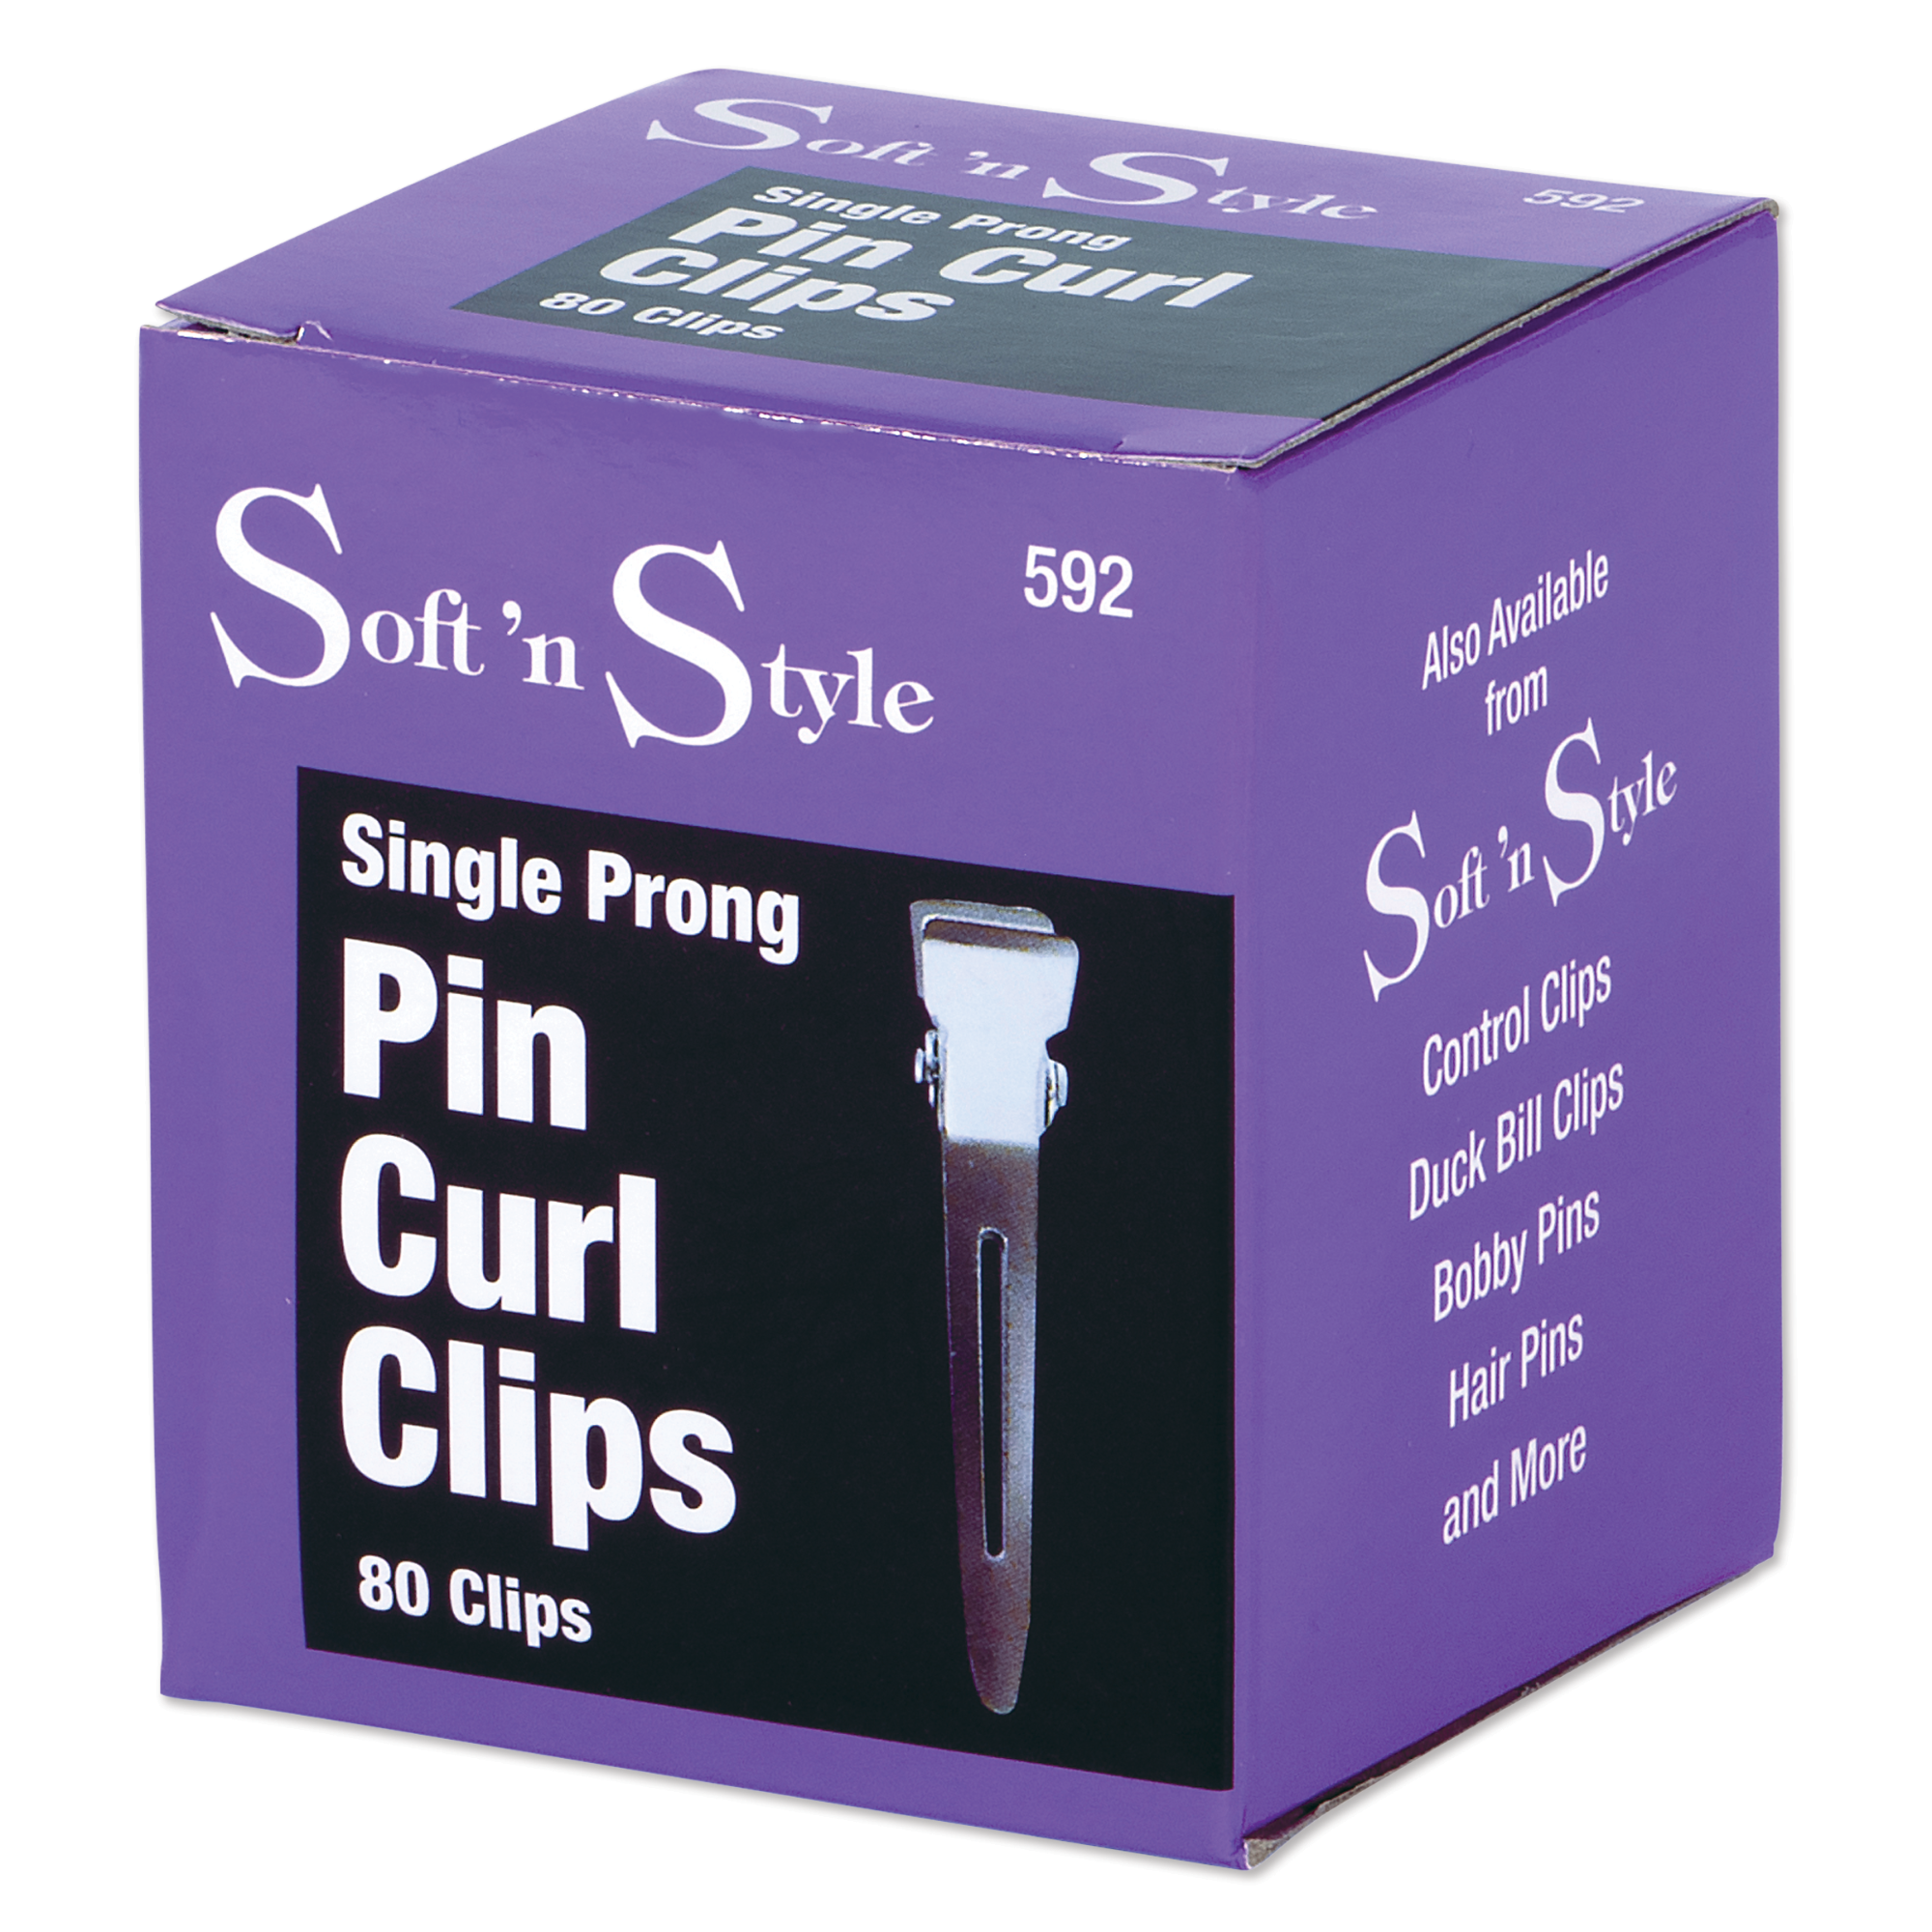 Single Prong Pin Curl Clips - box of 80|Beauty School Store